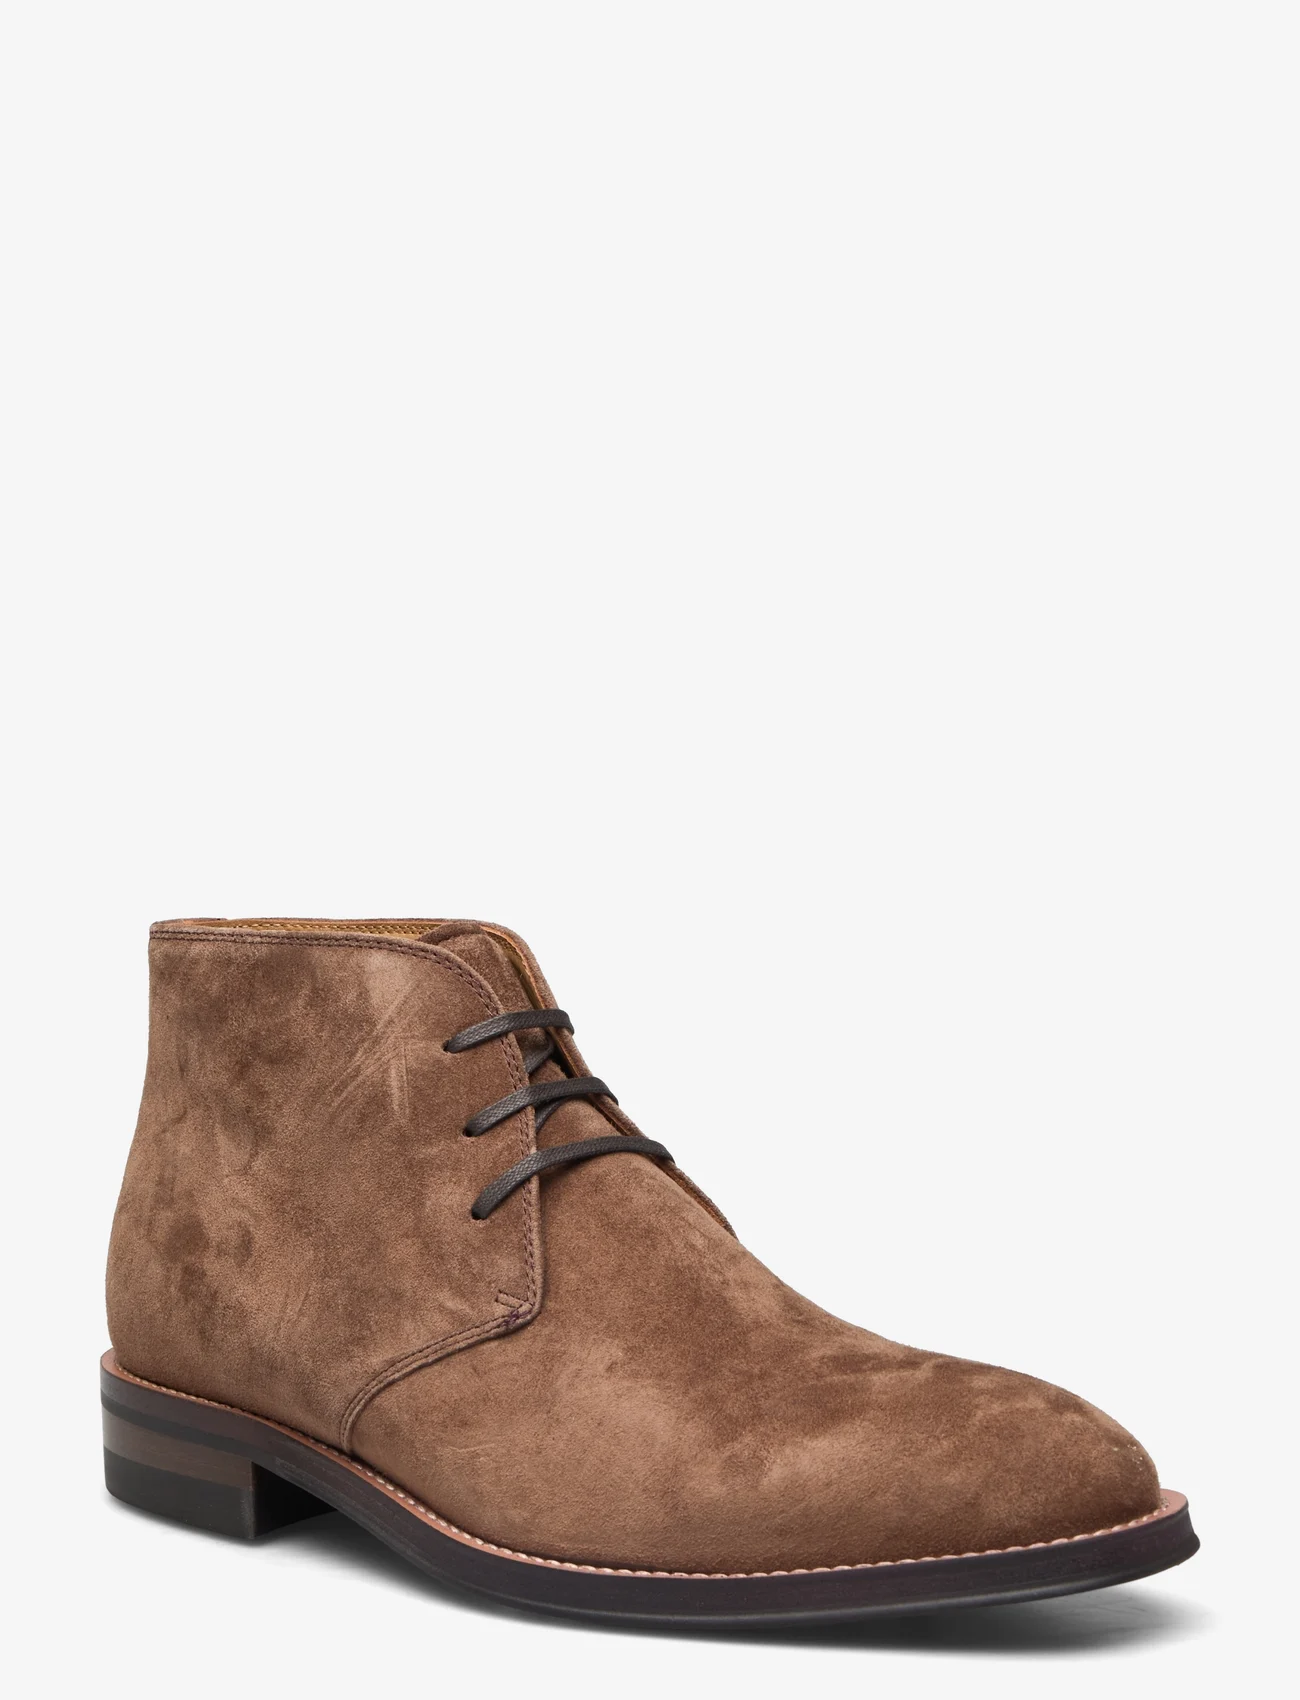 Dune London - maloney - laced shoes - brown - 0